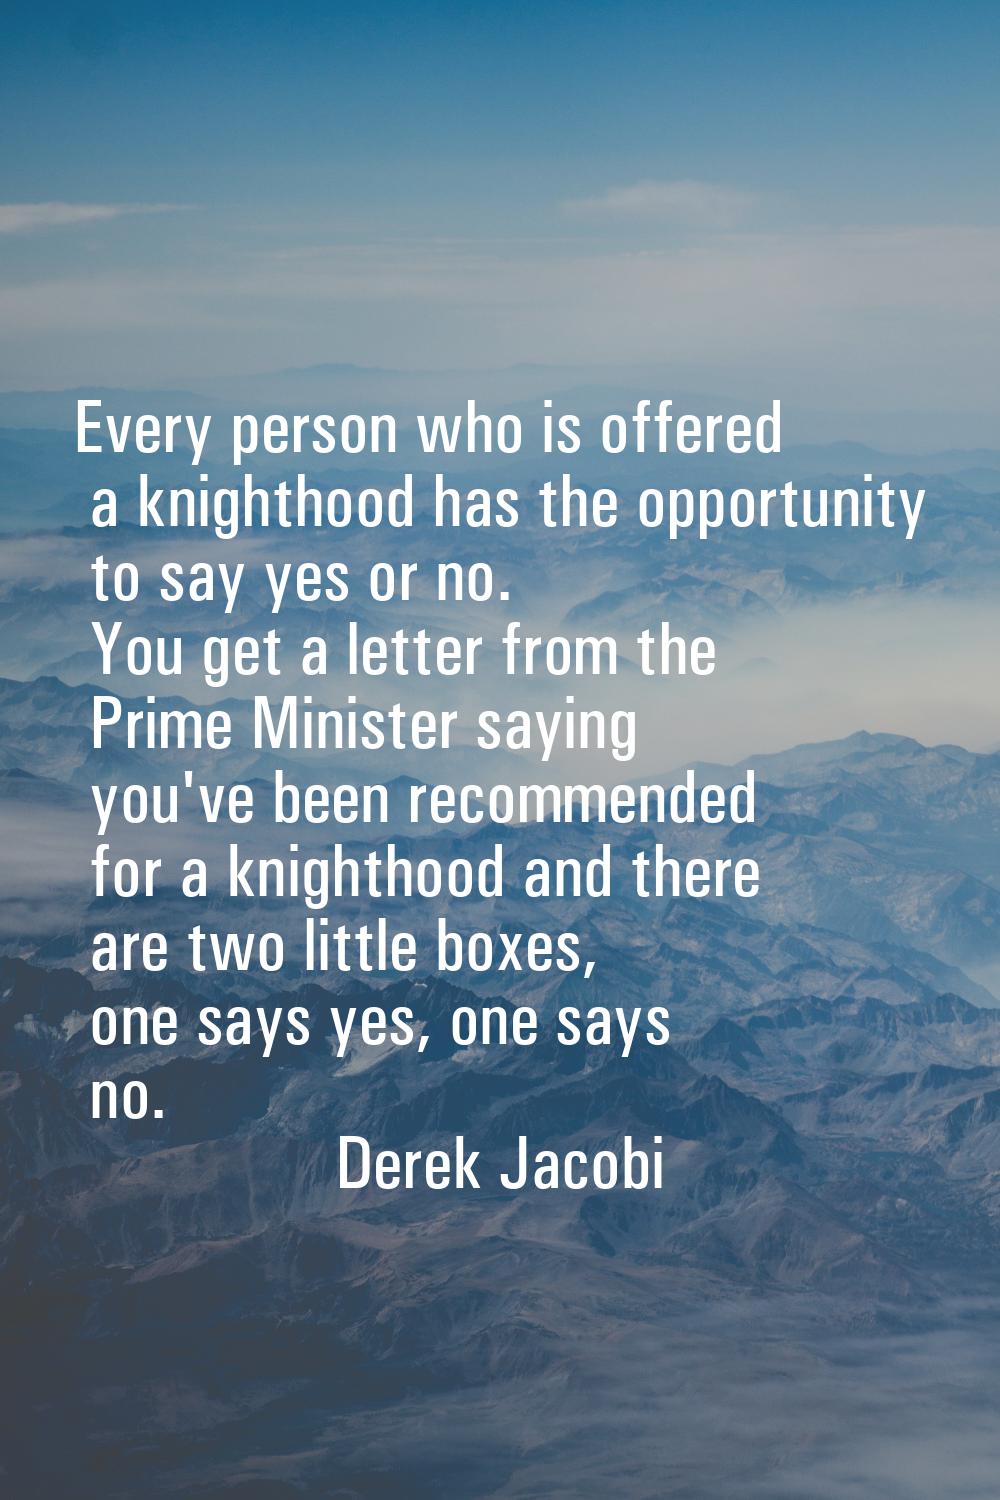 Every person who is offered a knighthood has the opportunity to say yes or no. You get a letter fro